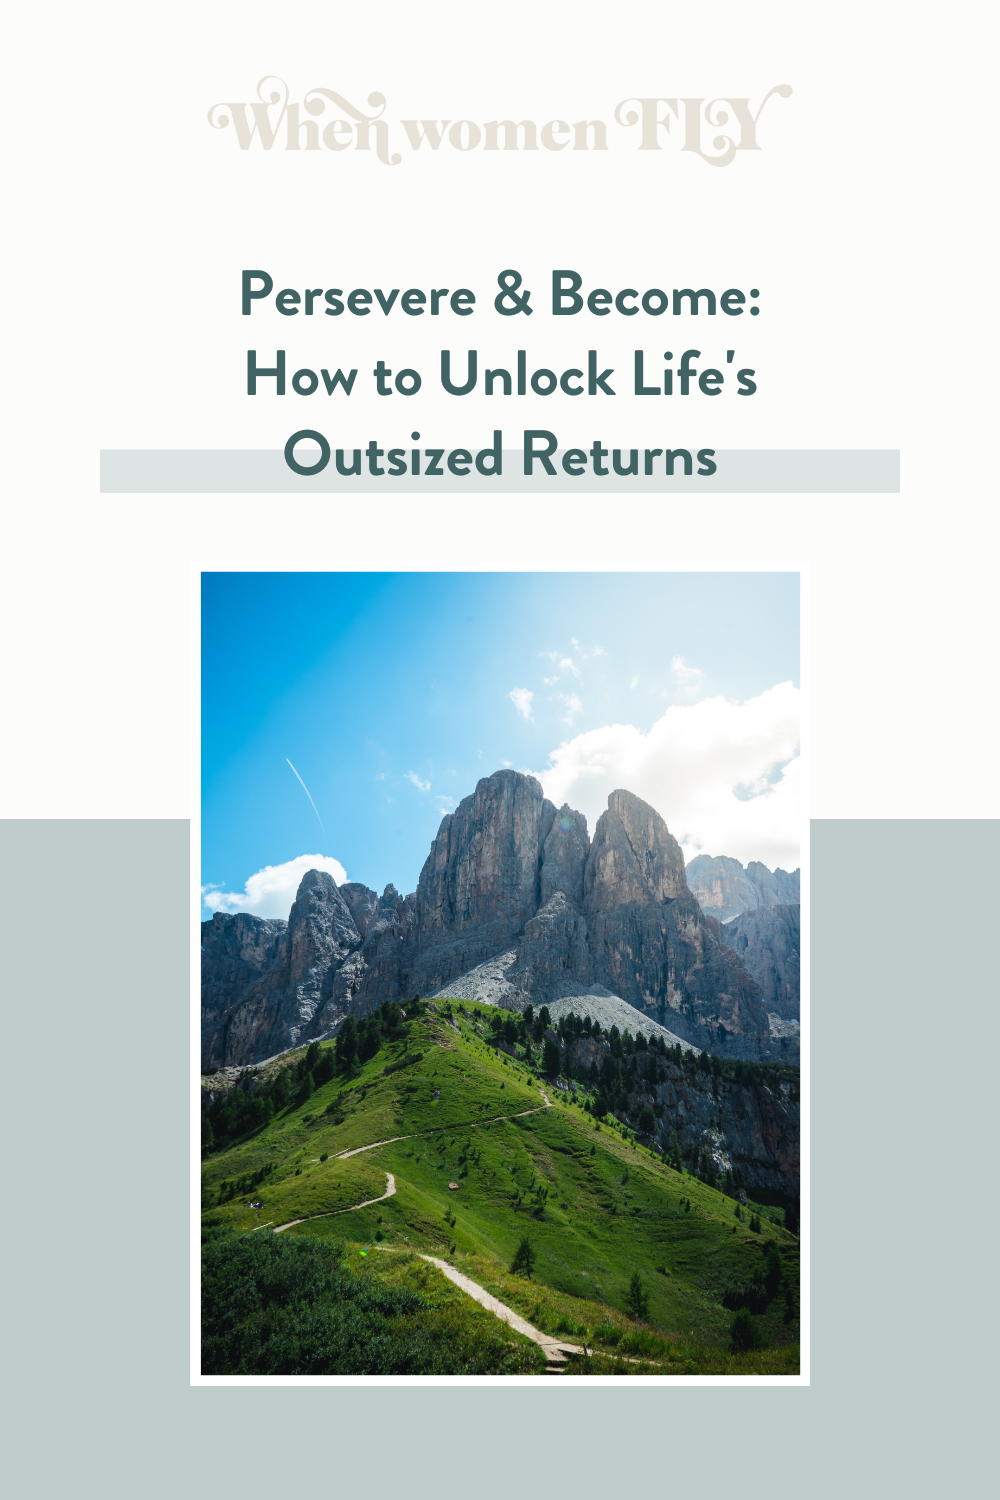 Persevere and Become: How to Unlock Life's Outsized Returns